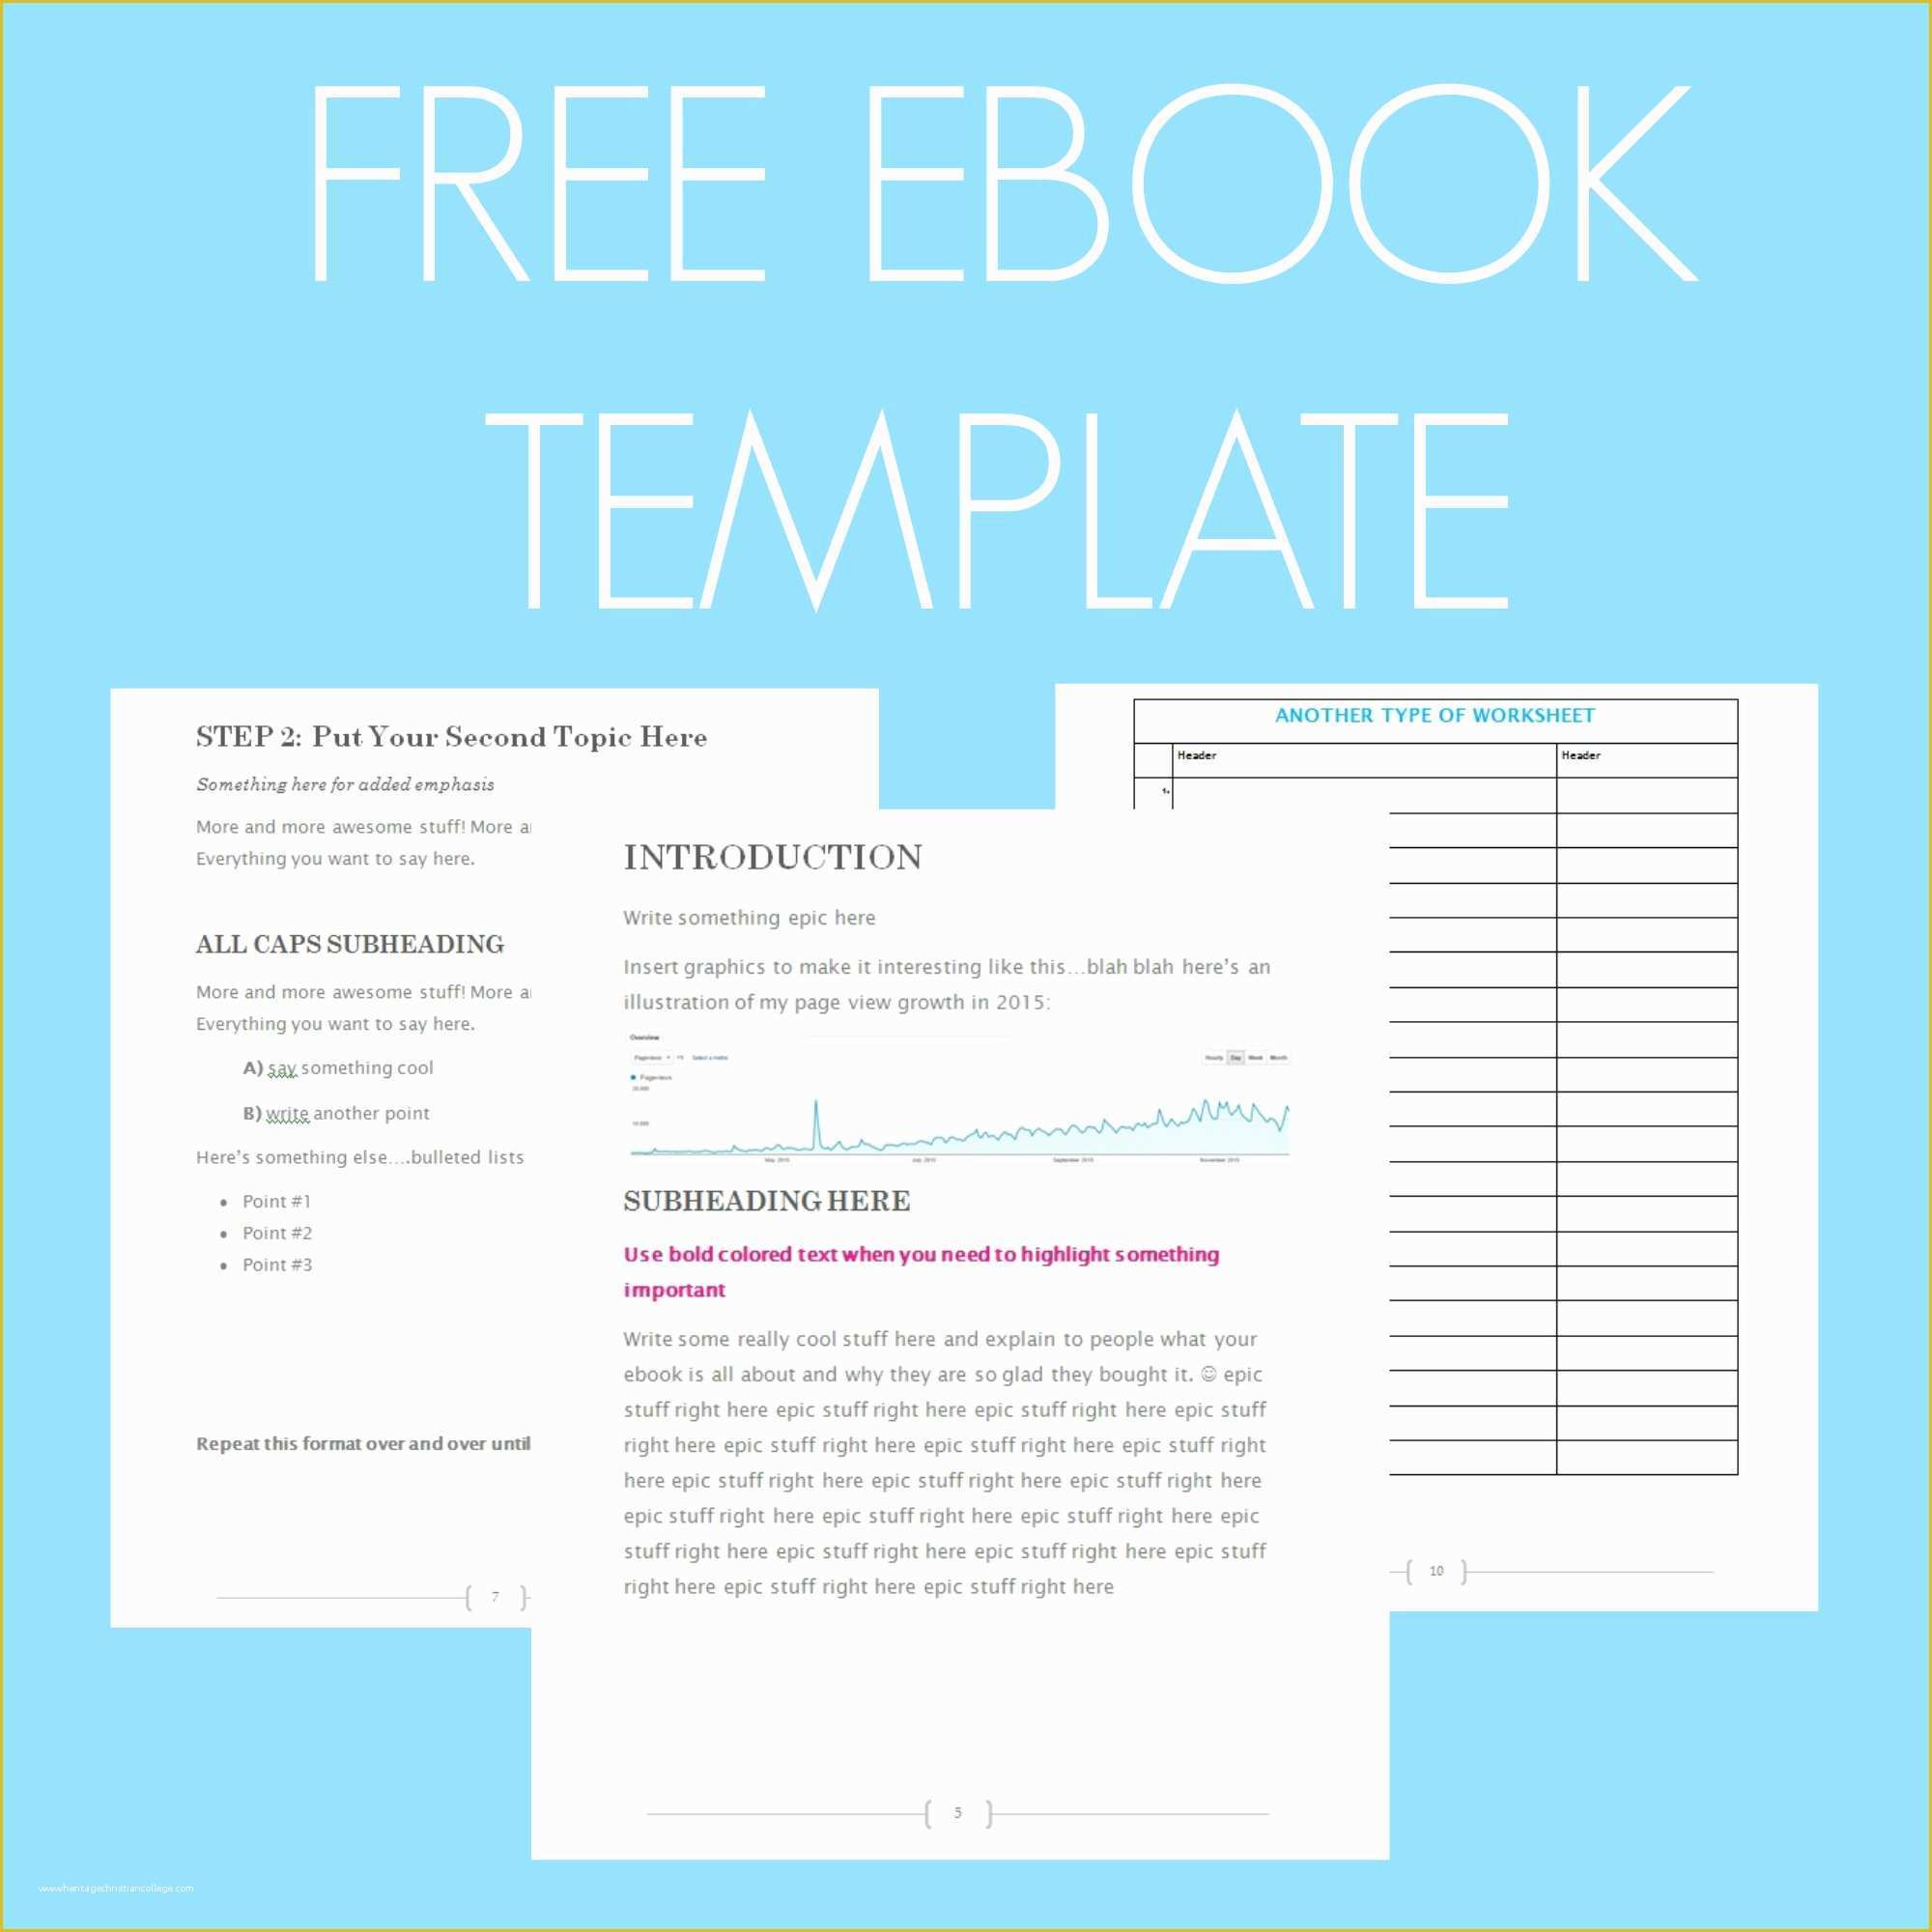 Free Ebook Templates for Word Of Free Ebook Template Preformatted Word Document What